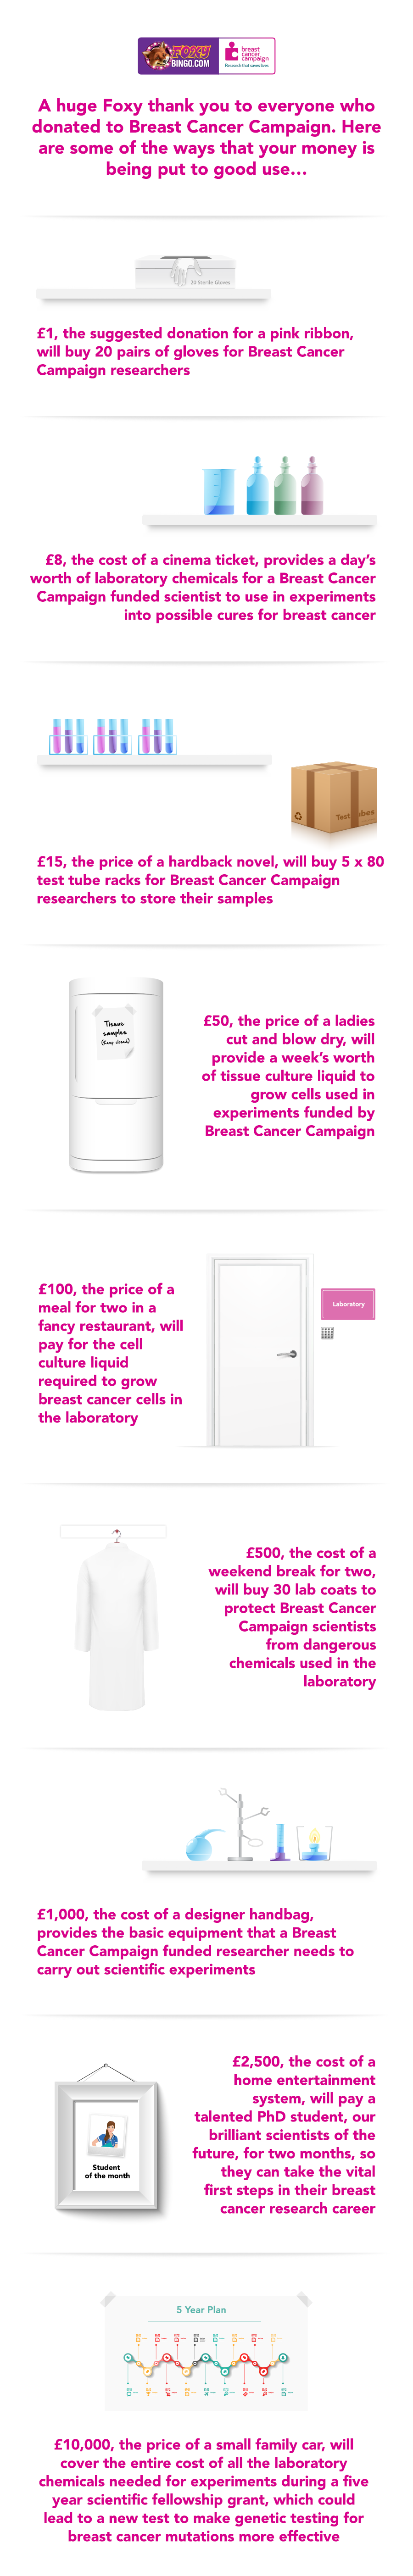 Foxy Breast cancer campaign - static_infographic